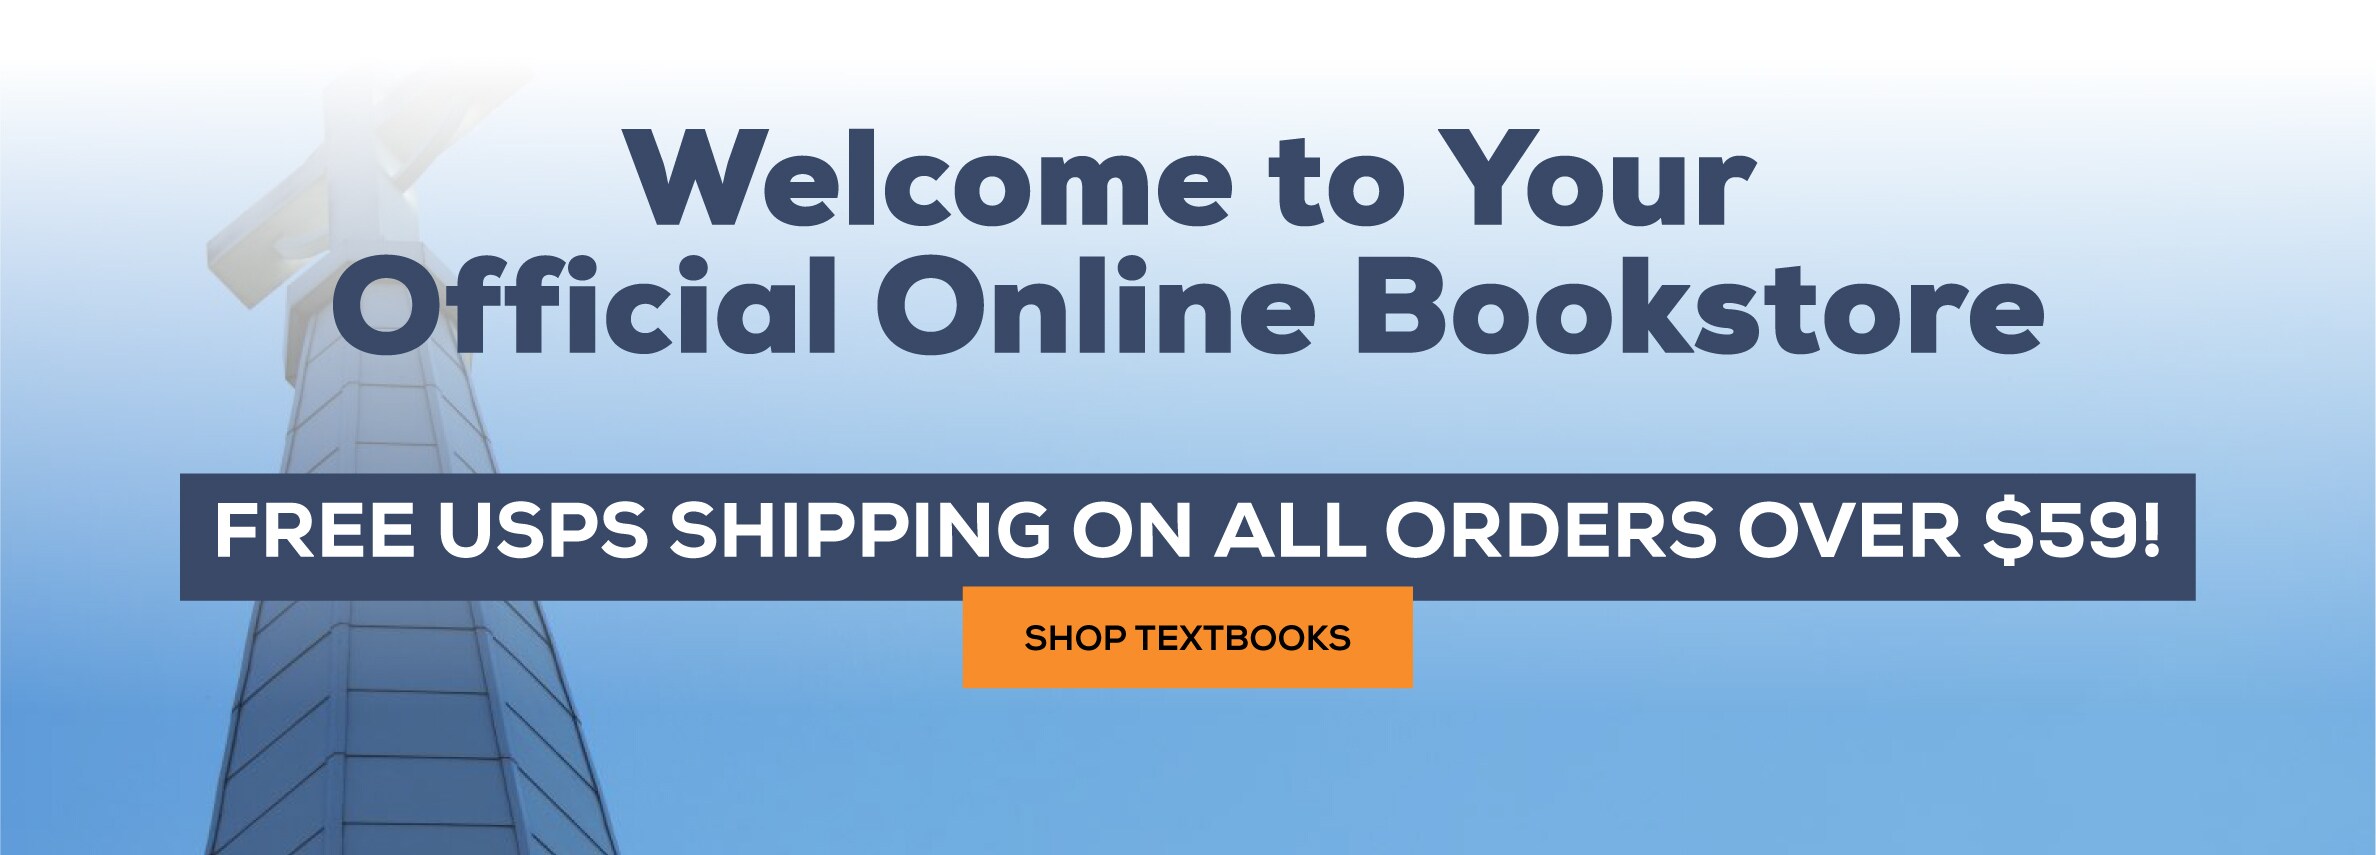 Welcome to your online bookstore